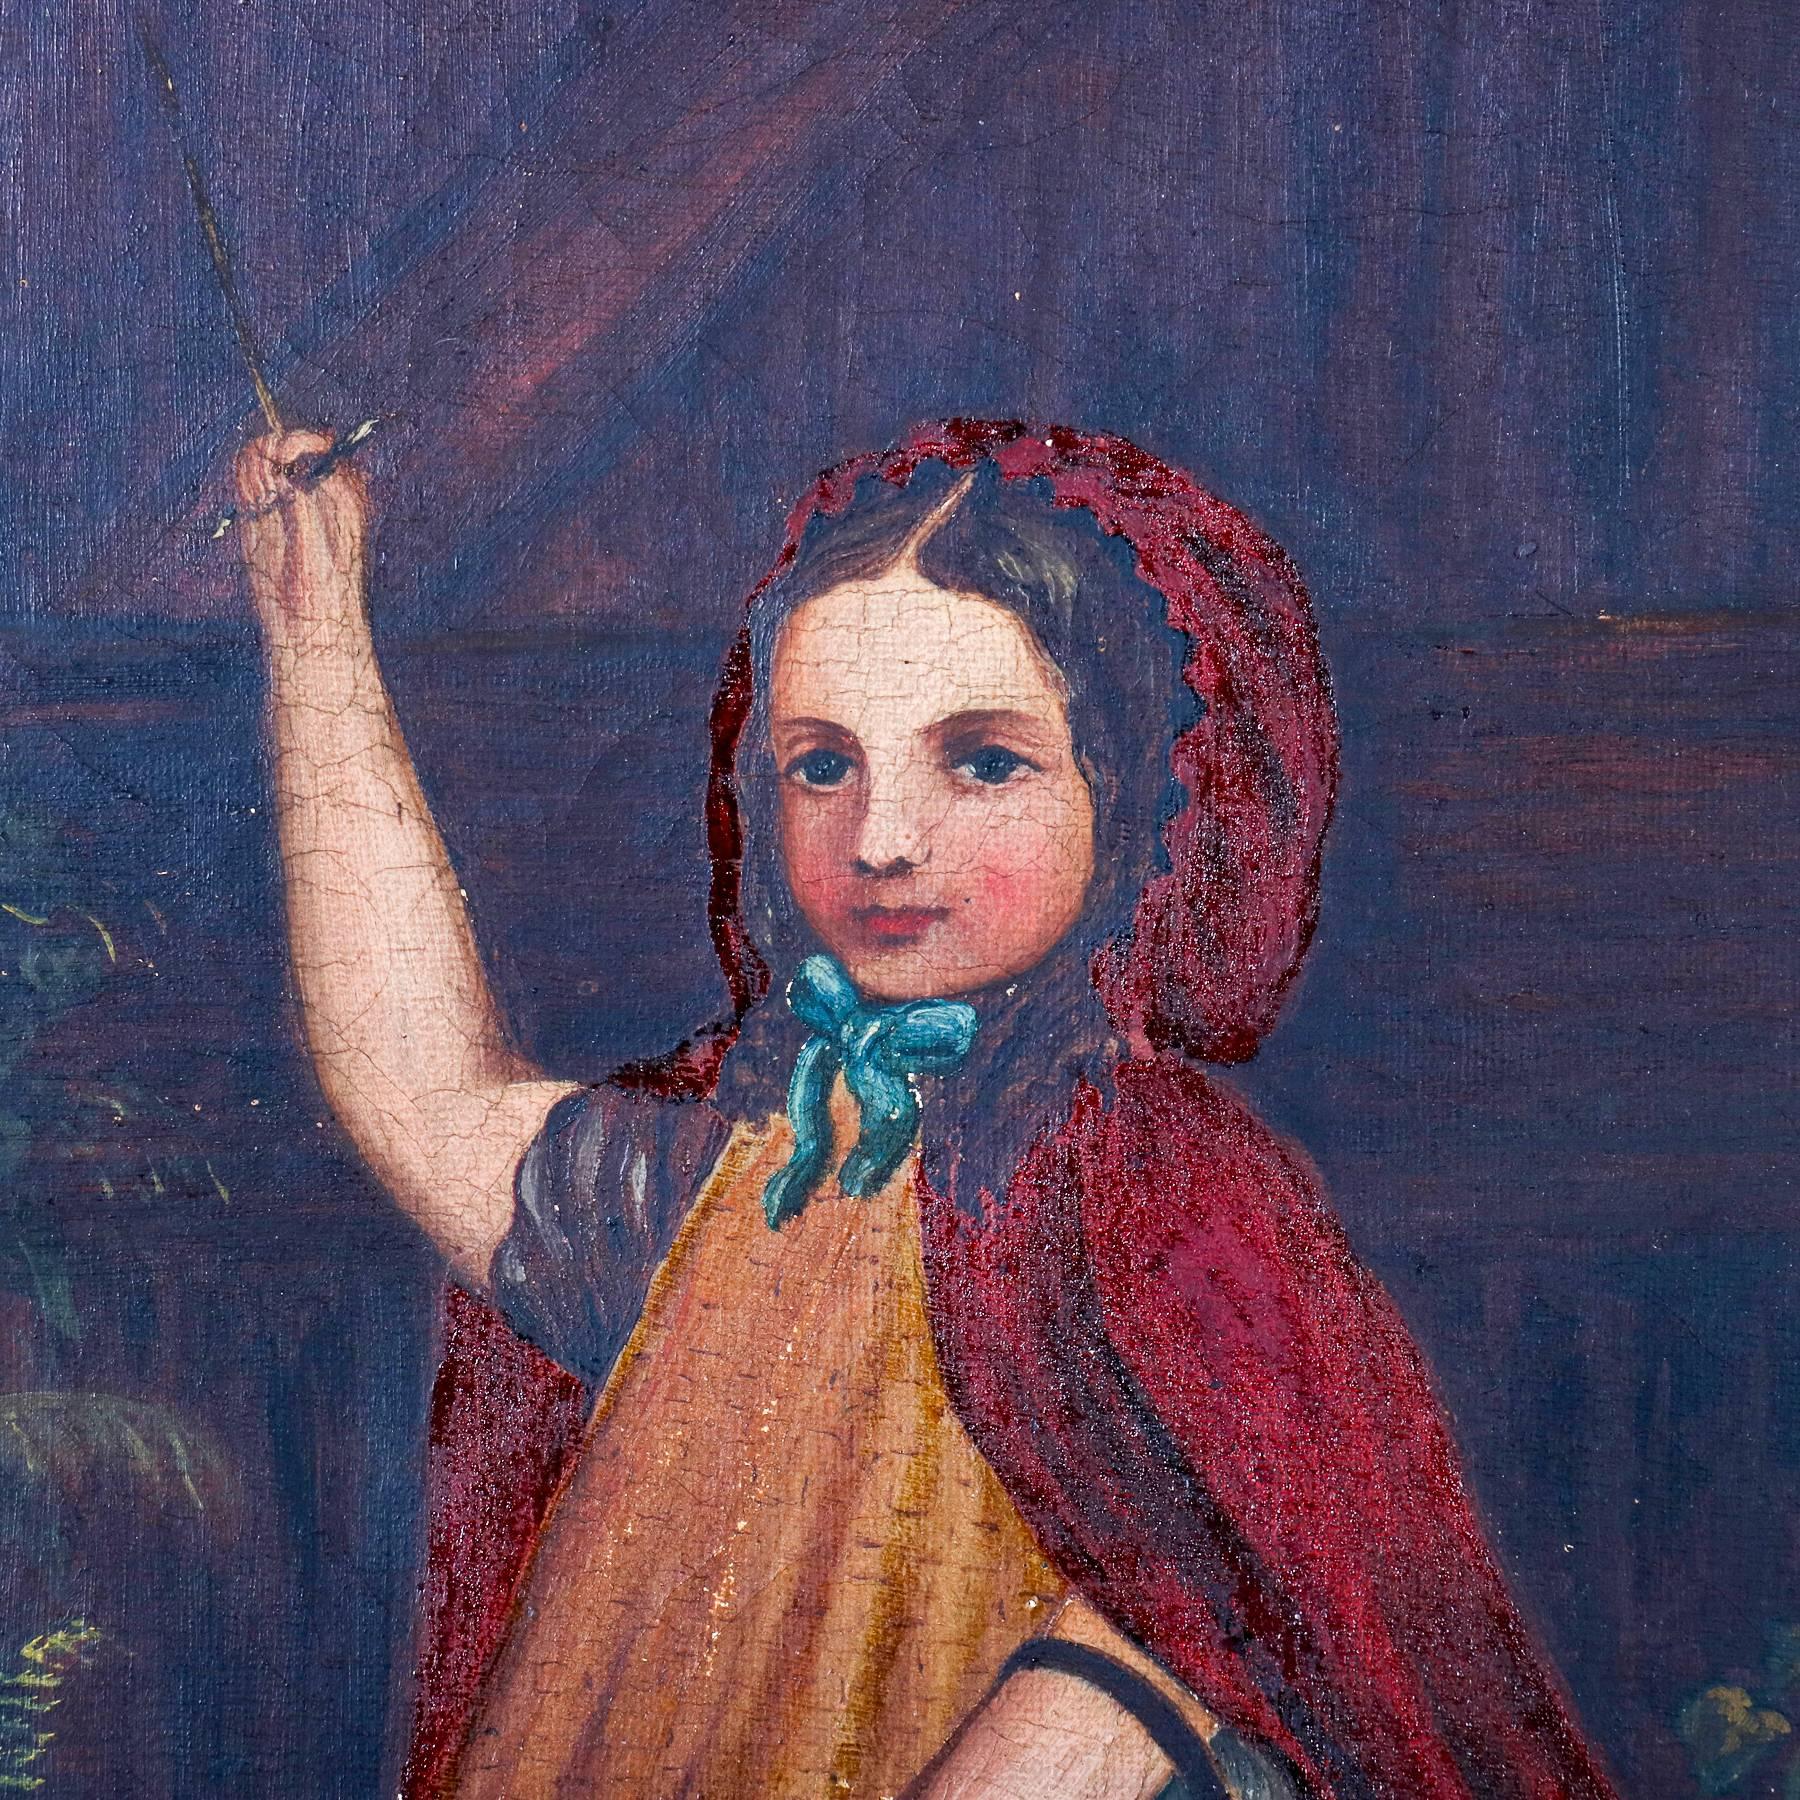 German Antique Oil on Canvas Folk Art Portrait Painting of Young Girl in Red Cape